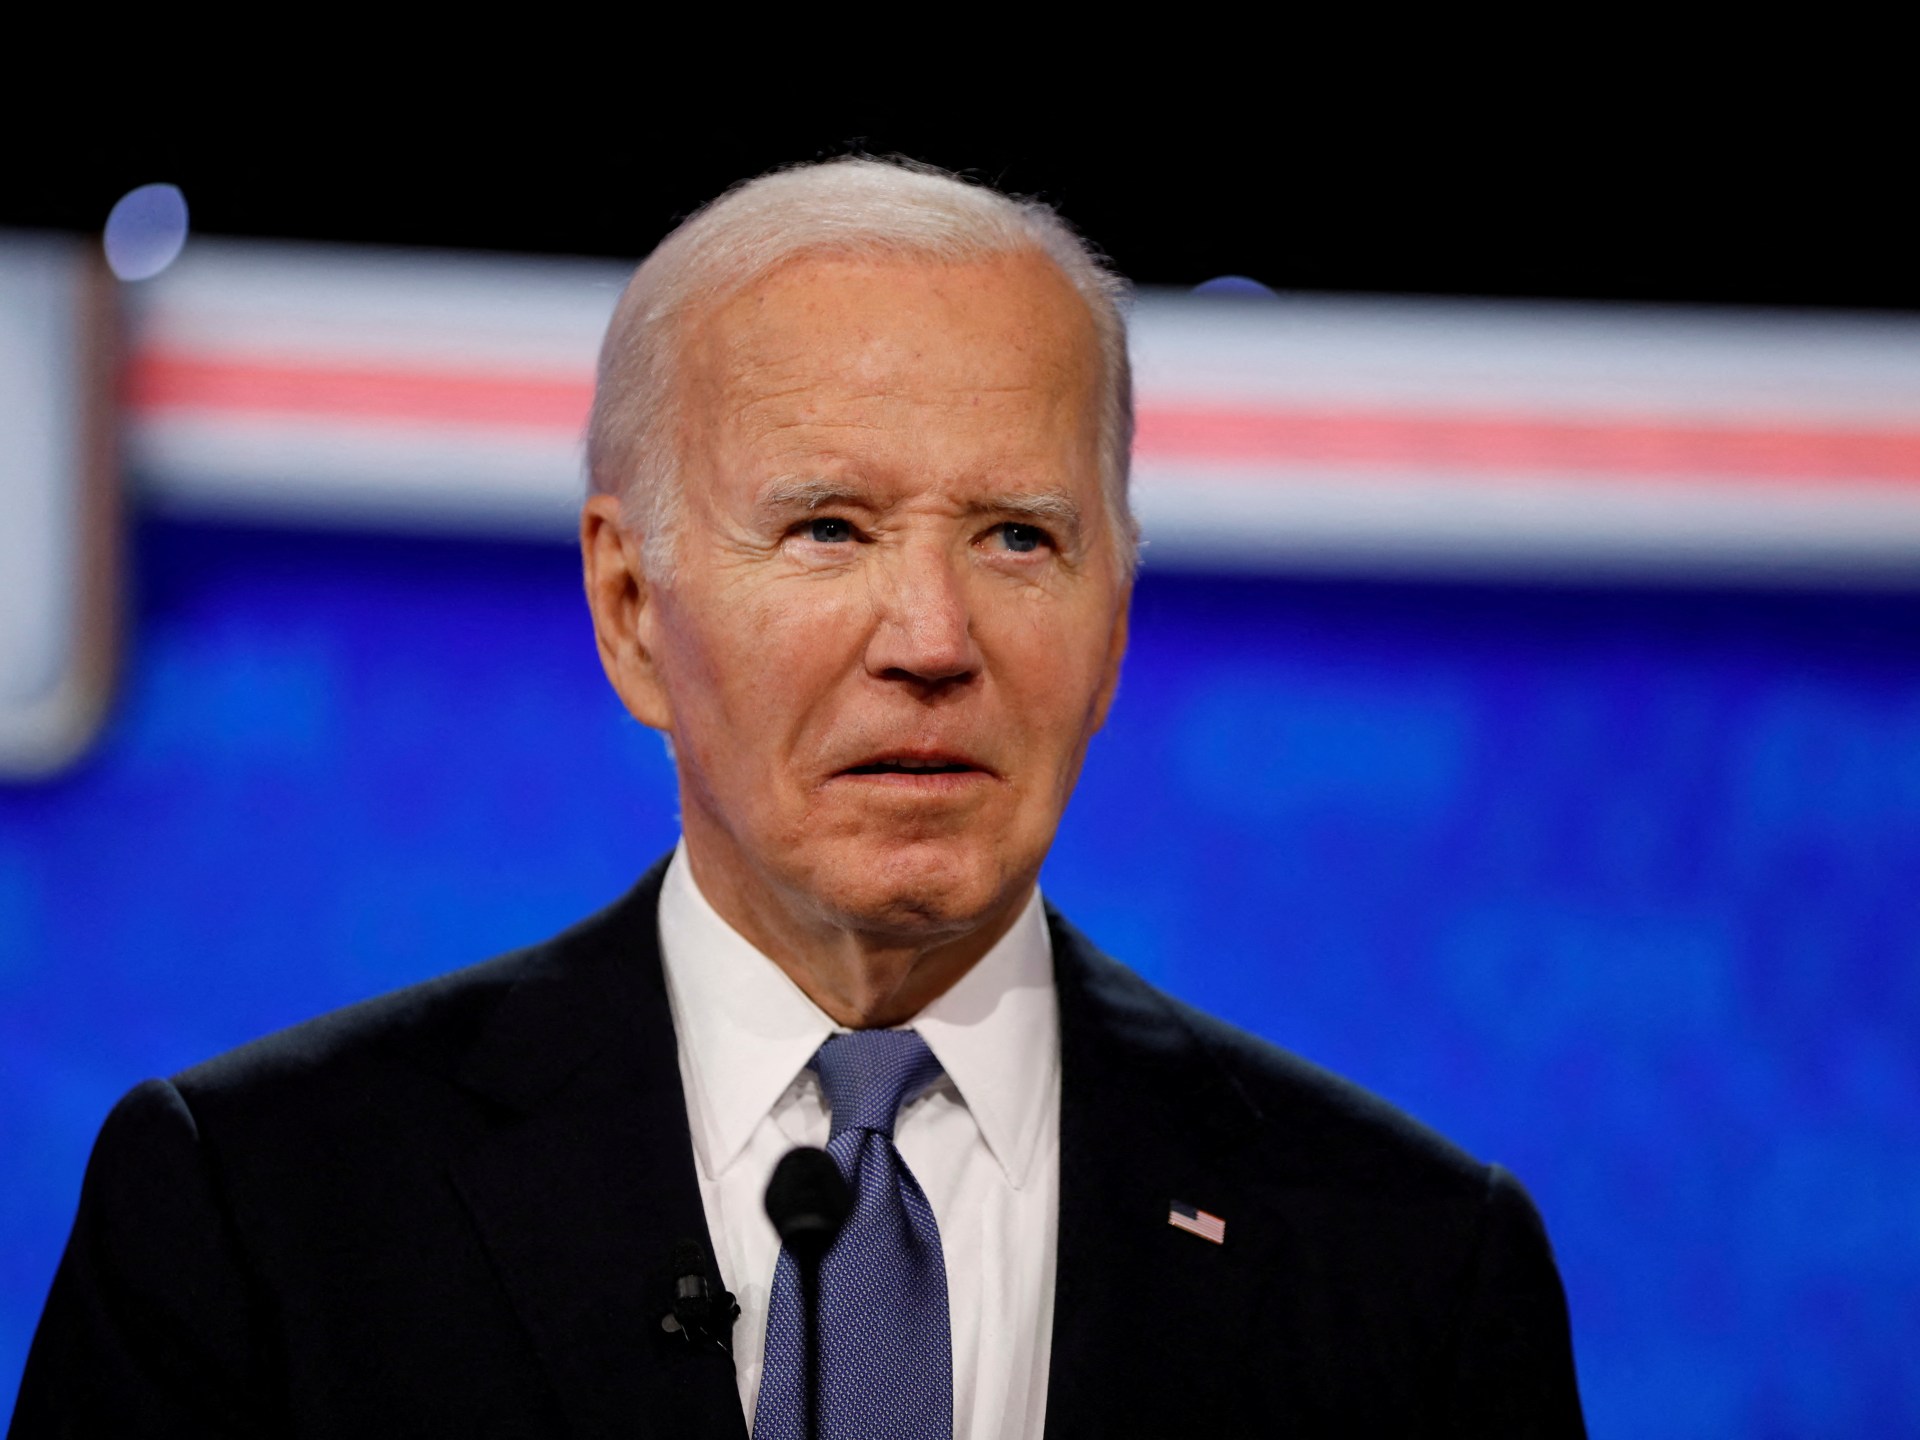 Biden is out of the election, but American plutocracy carries on